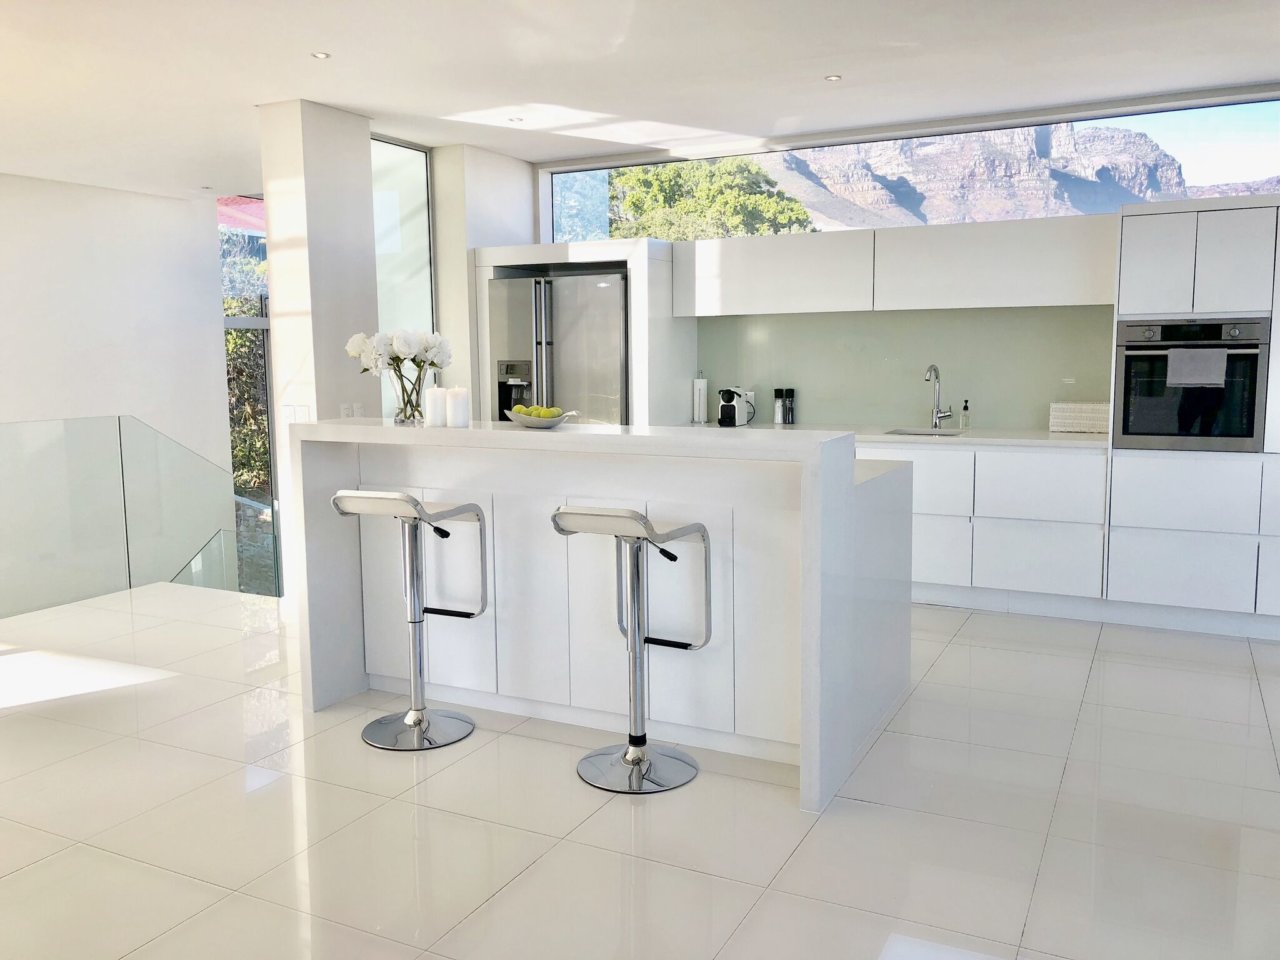 Photo 37 of Aqua Villa accommodation in Camps Bay, Cape Town with 5 bedrooms and 5 bathrooms